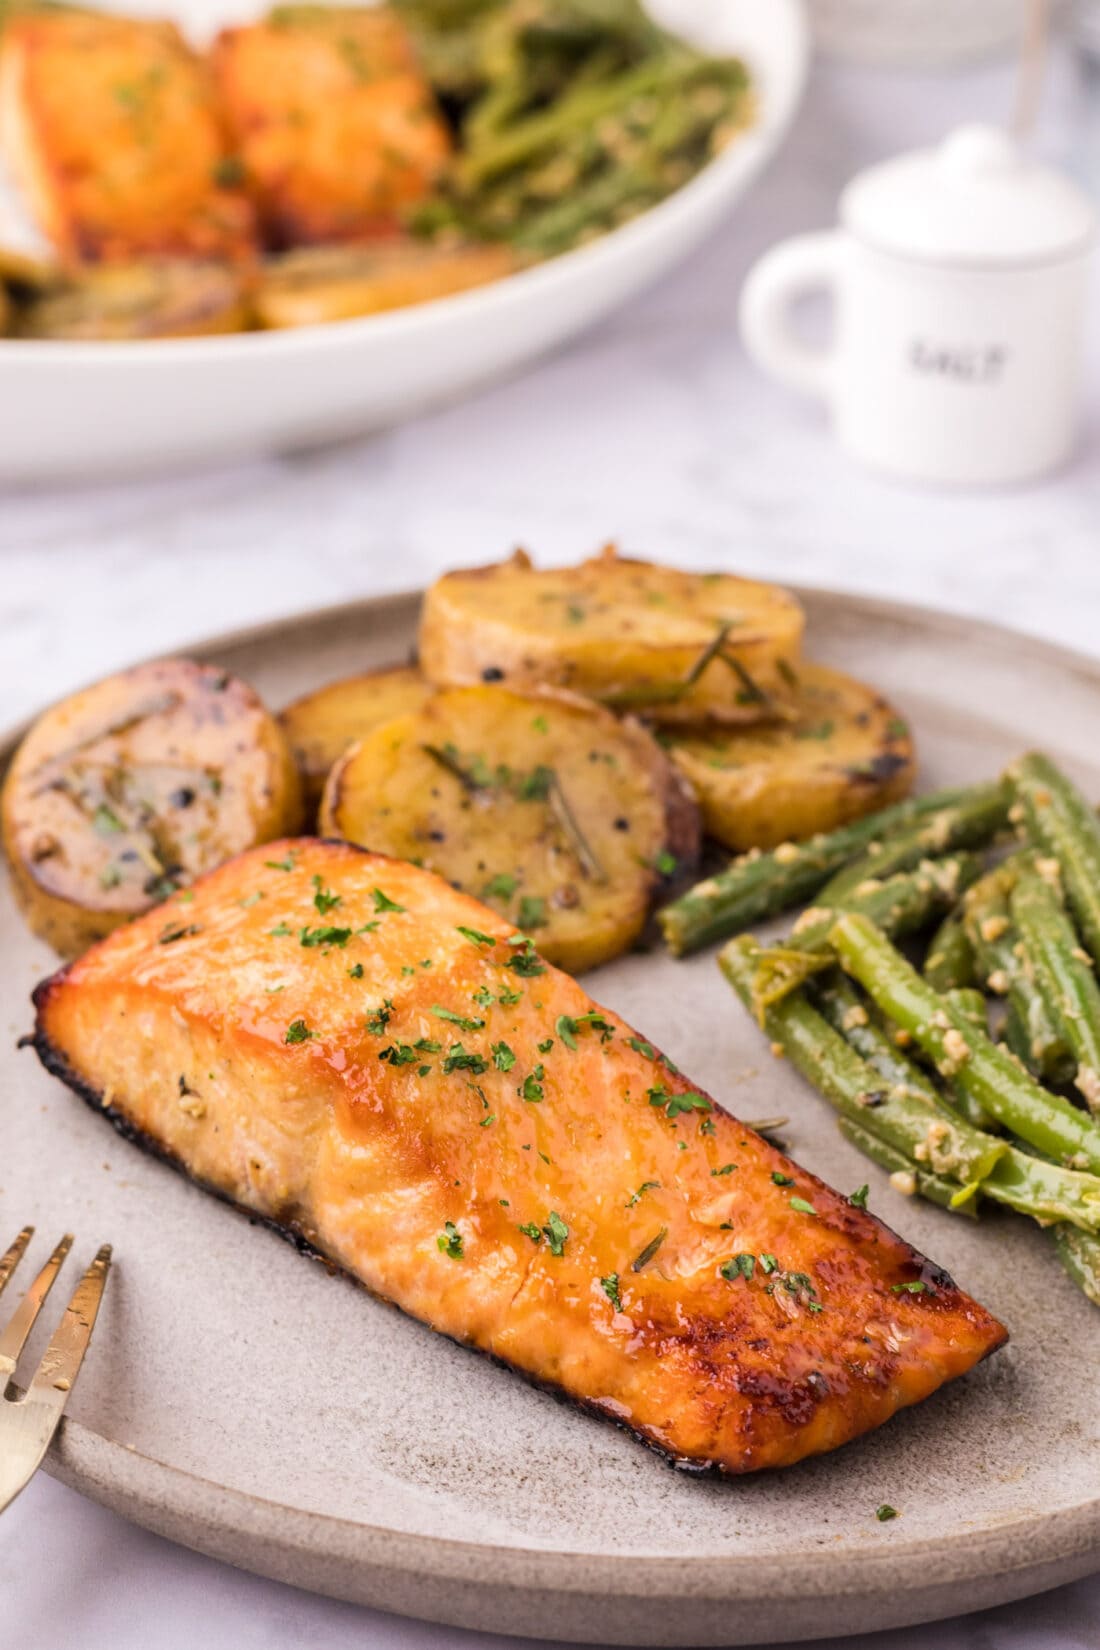 Brown Sugar Salmon on a plate with melting potatoes and garlic green beans